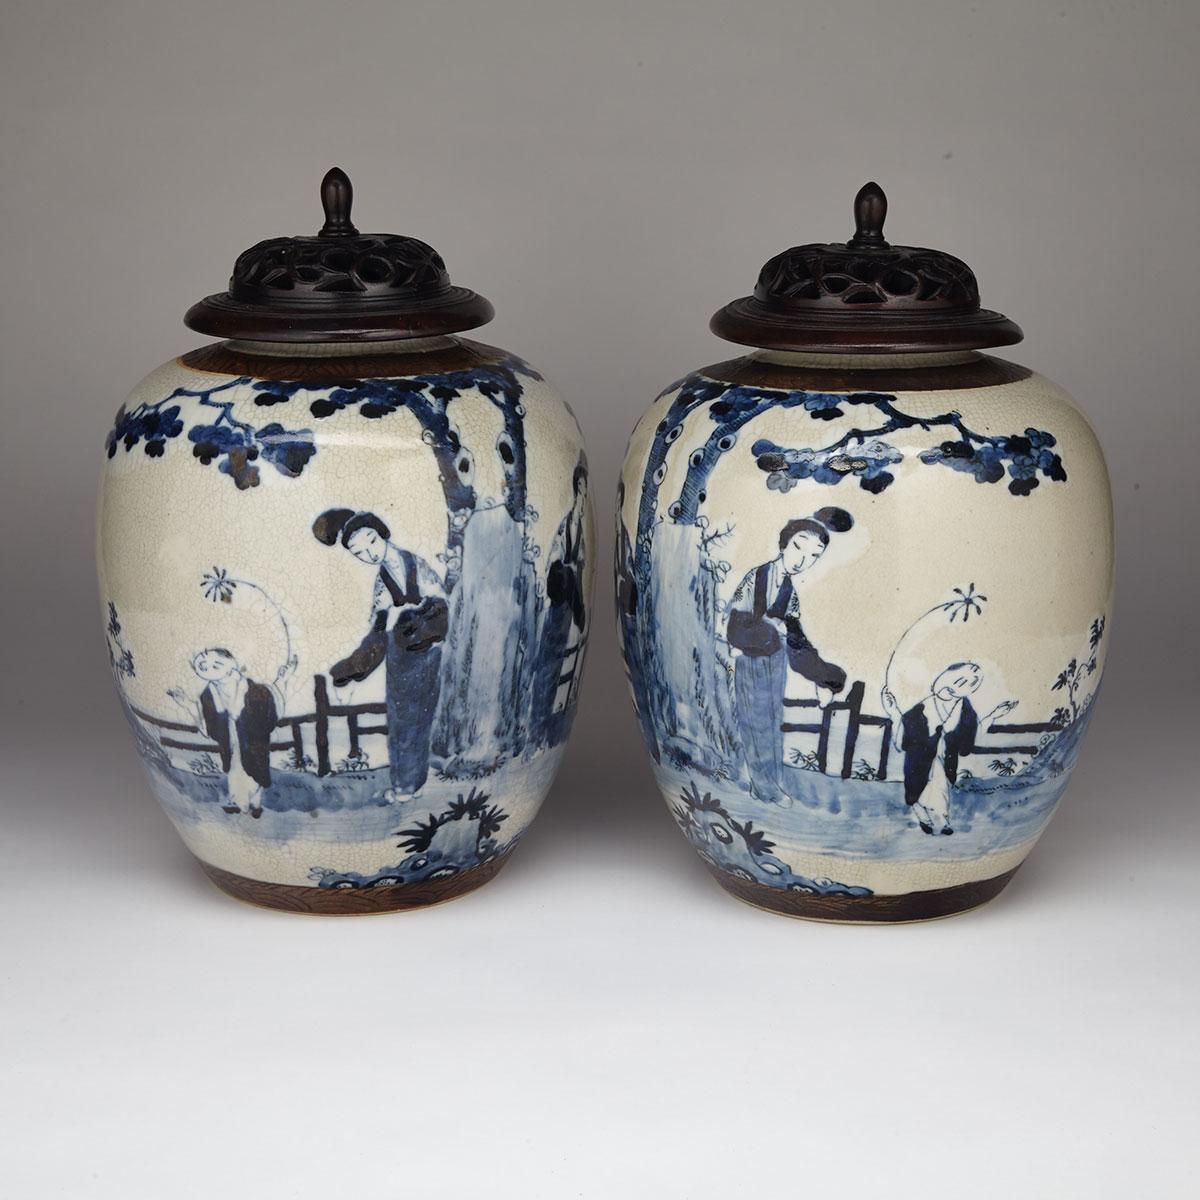 Pair of Large Blue and White Ginger Jars, Circa 1900